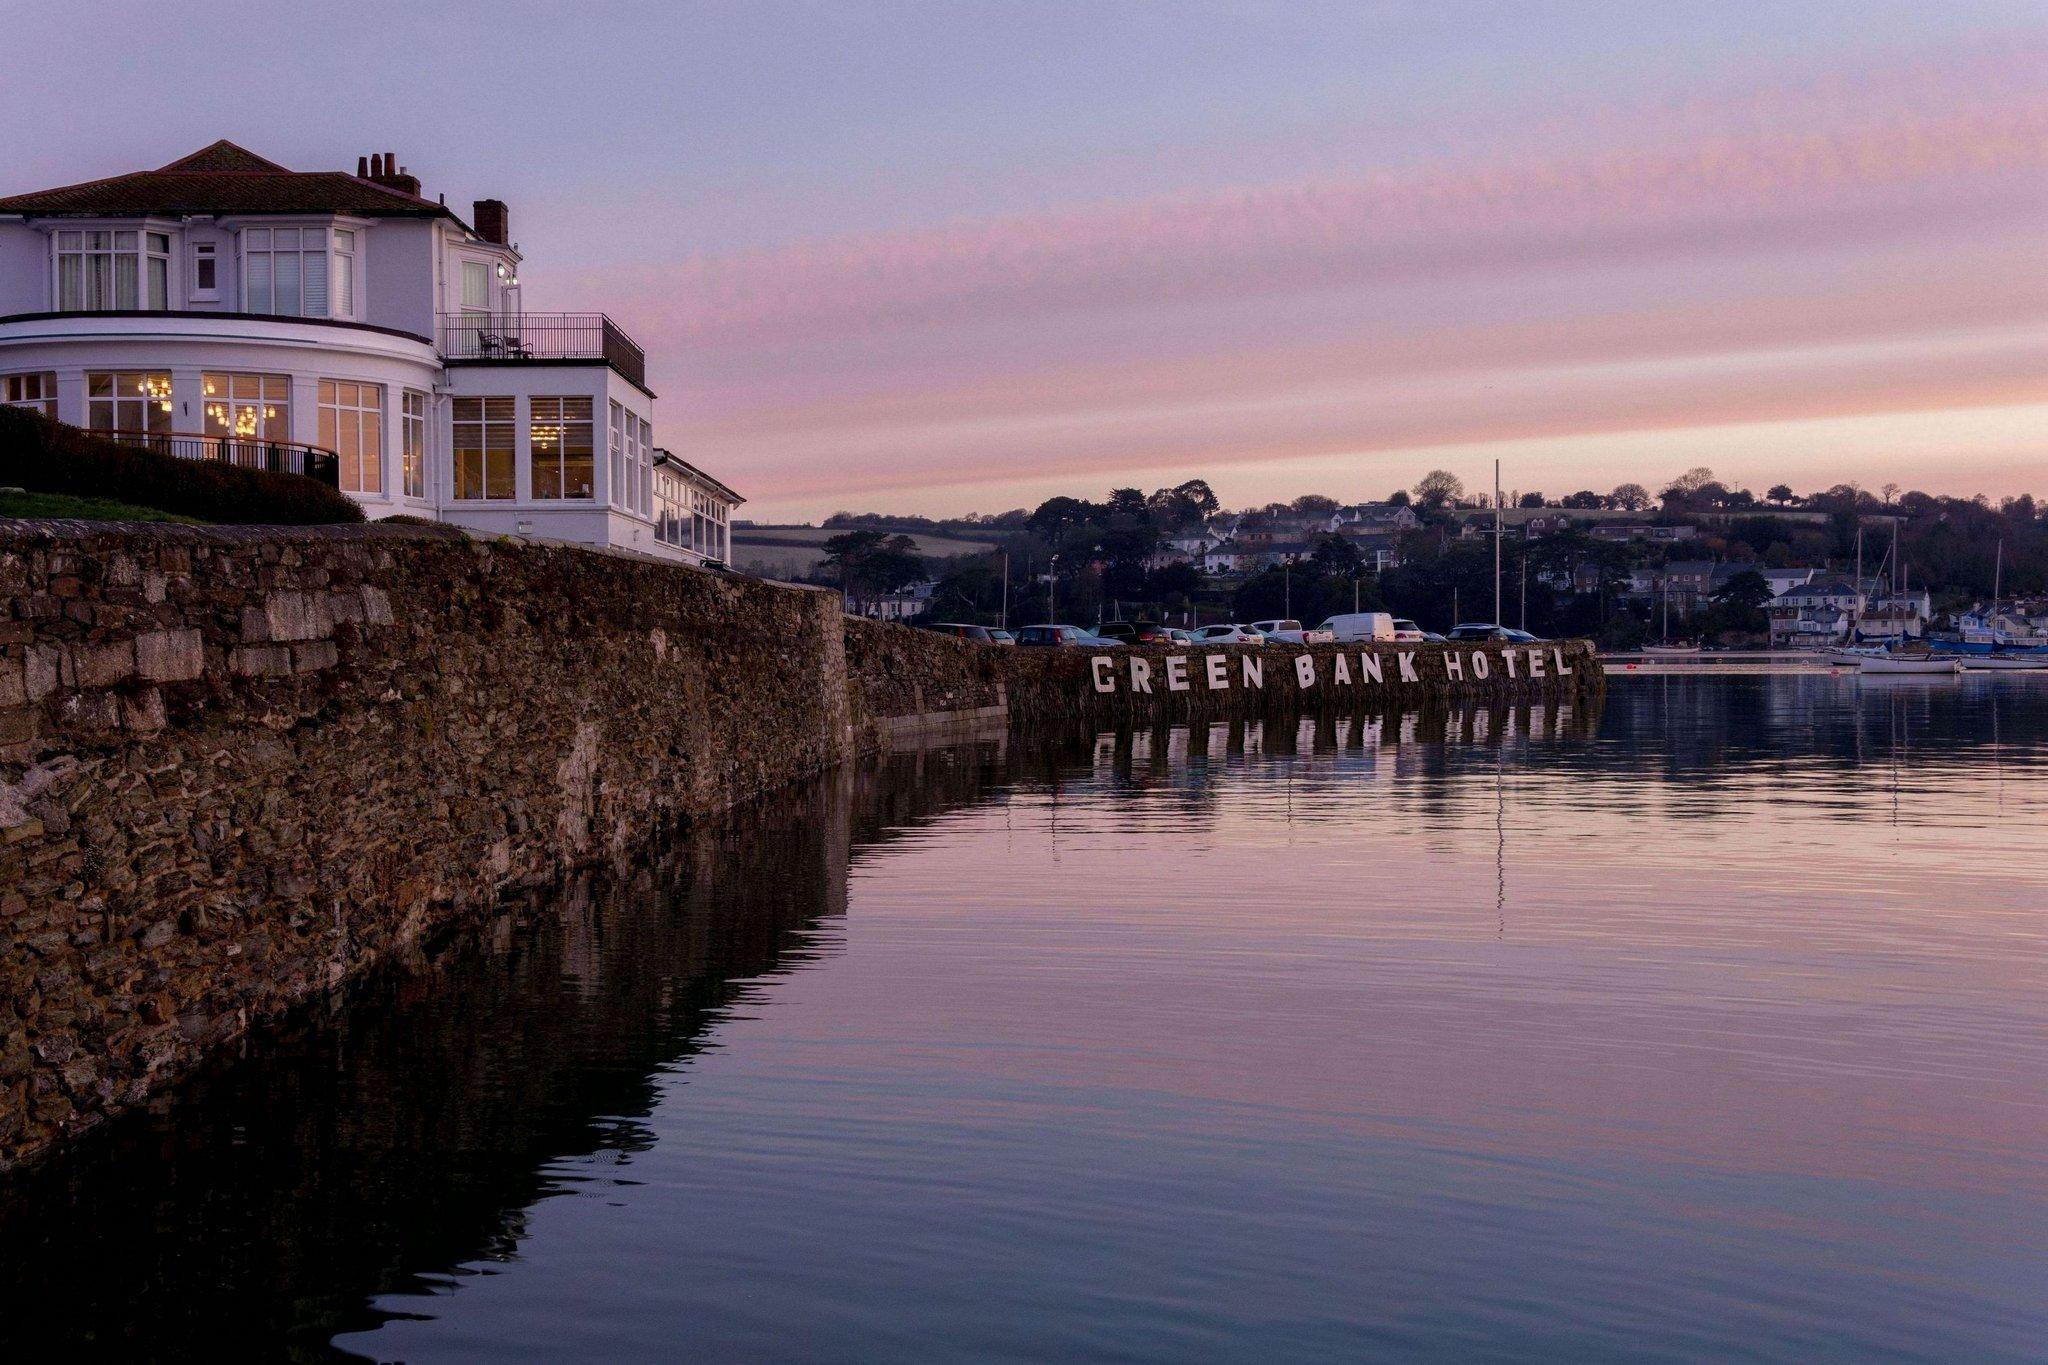 The Greenbank Hotel in Falmouth, GB1